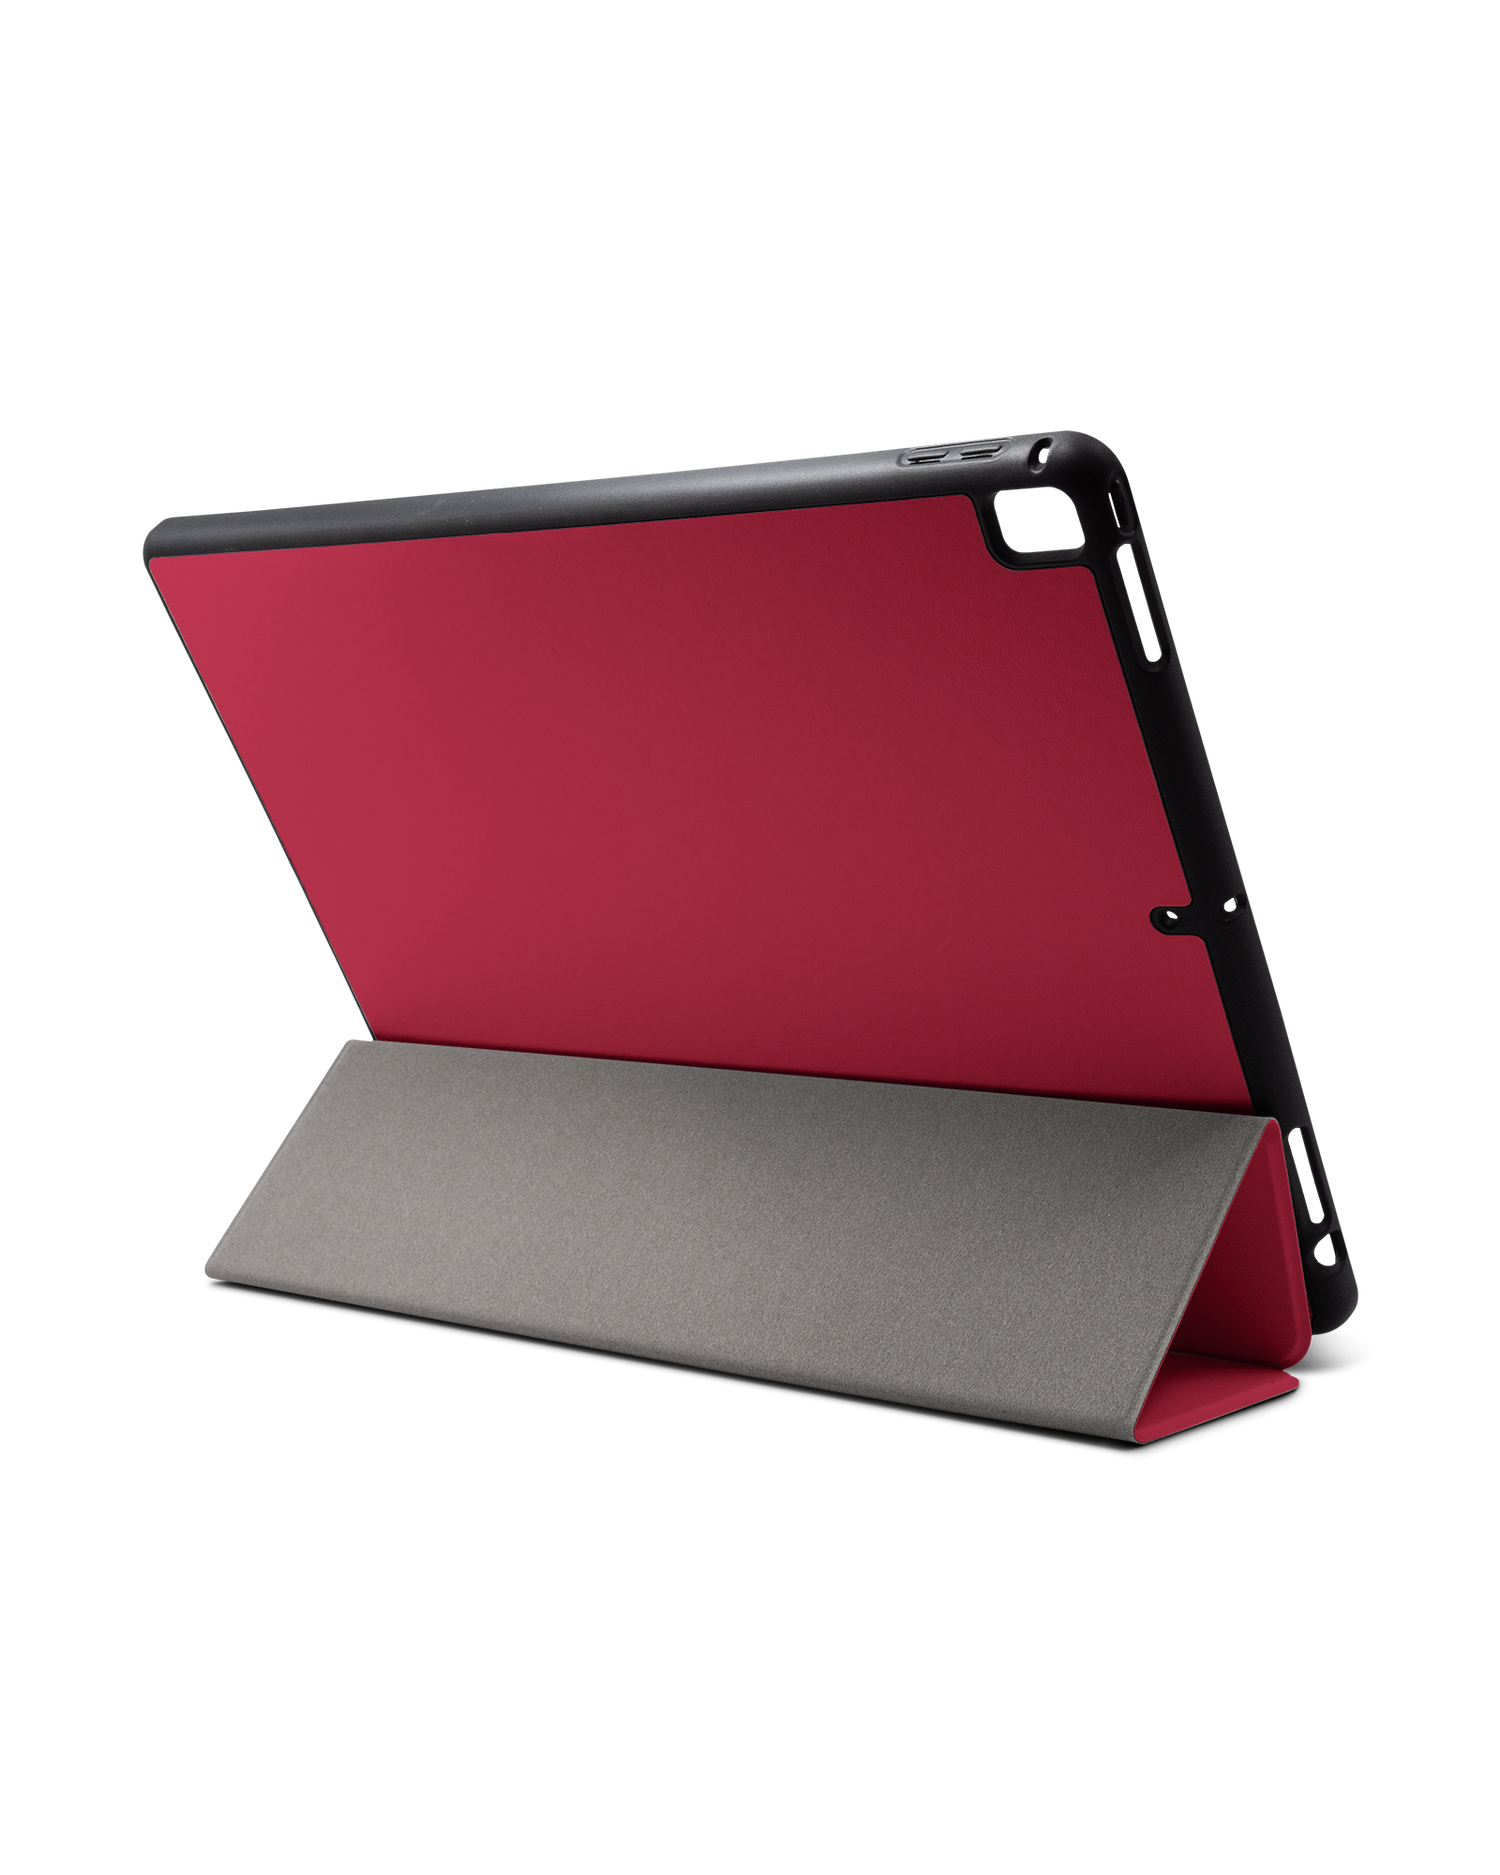 iPad Pro 2 Case Pencil RED | caseable